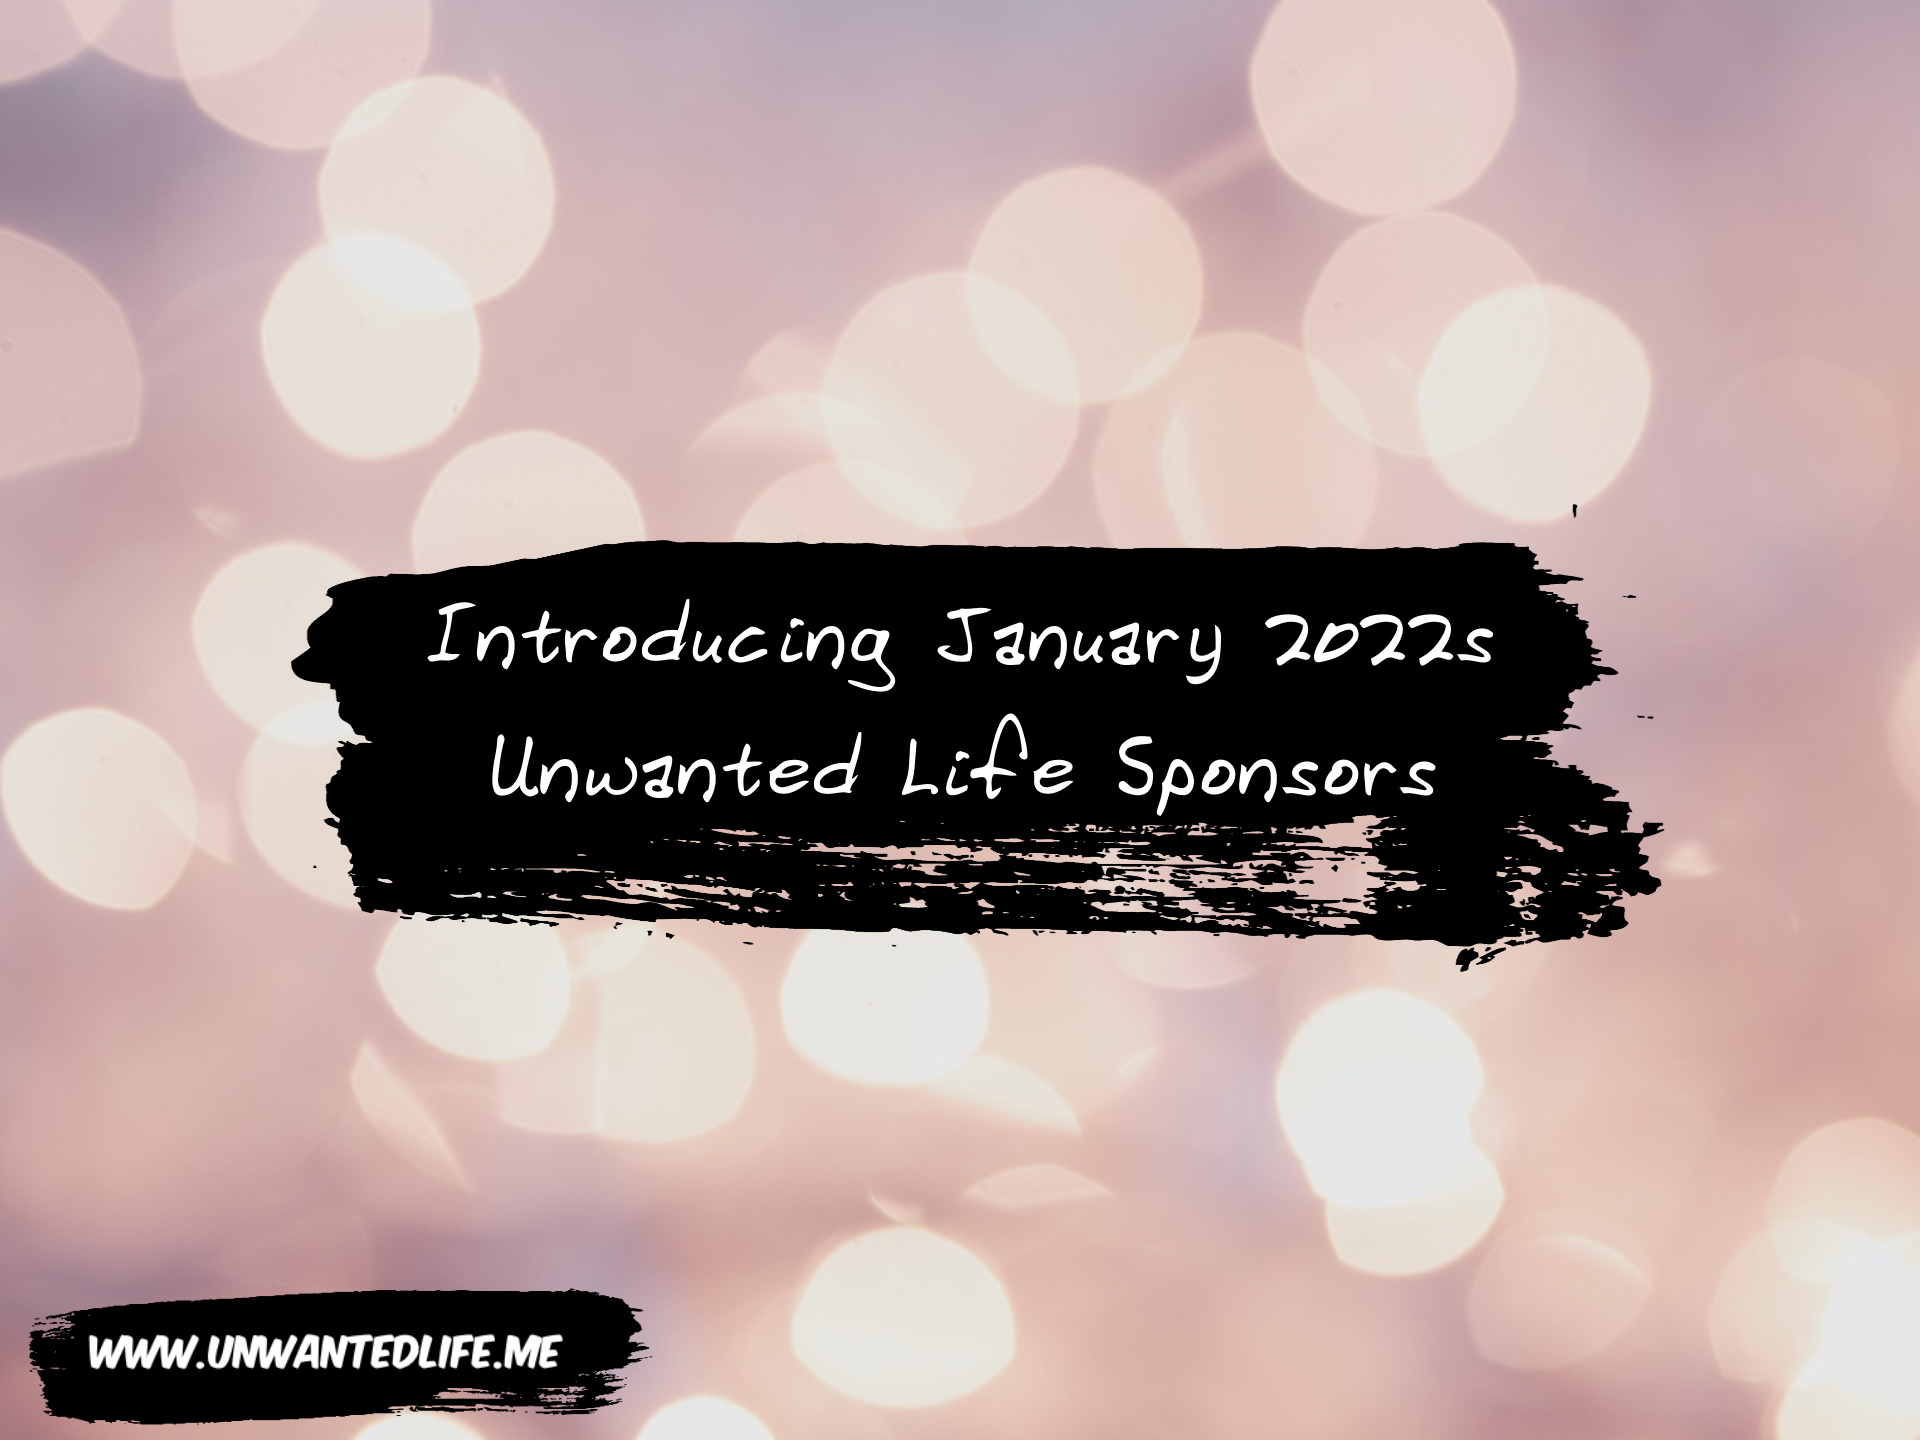 A bright pink image with circles of light scattered across the image with the title of the article - Introducing January 2022s Unwanted Life Sponsors - across the centre